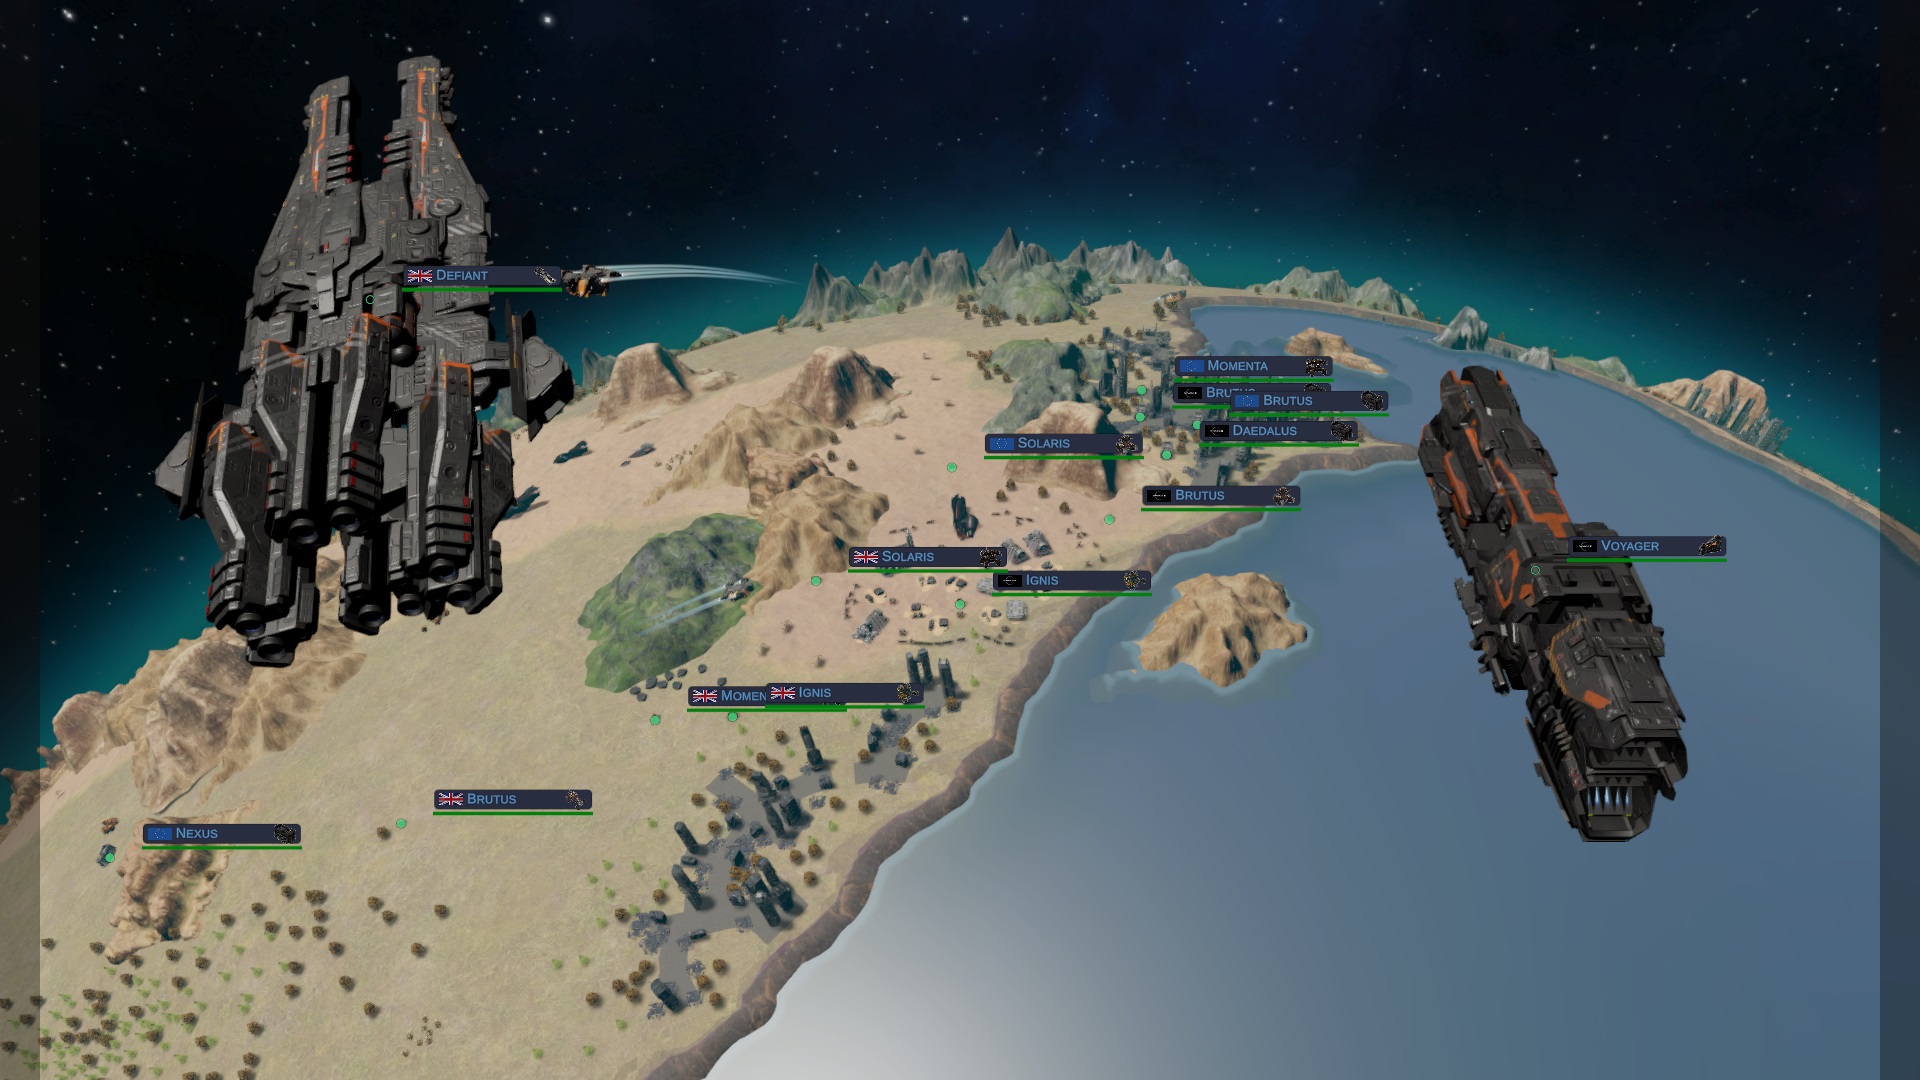 Homeworld and Battlestar Galactica collide in new space RTS game Fragile Existence